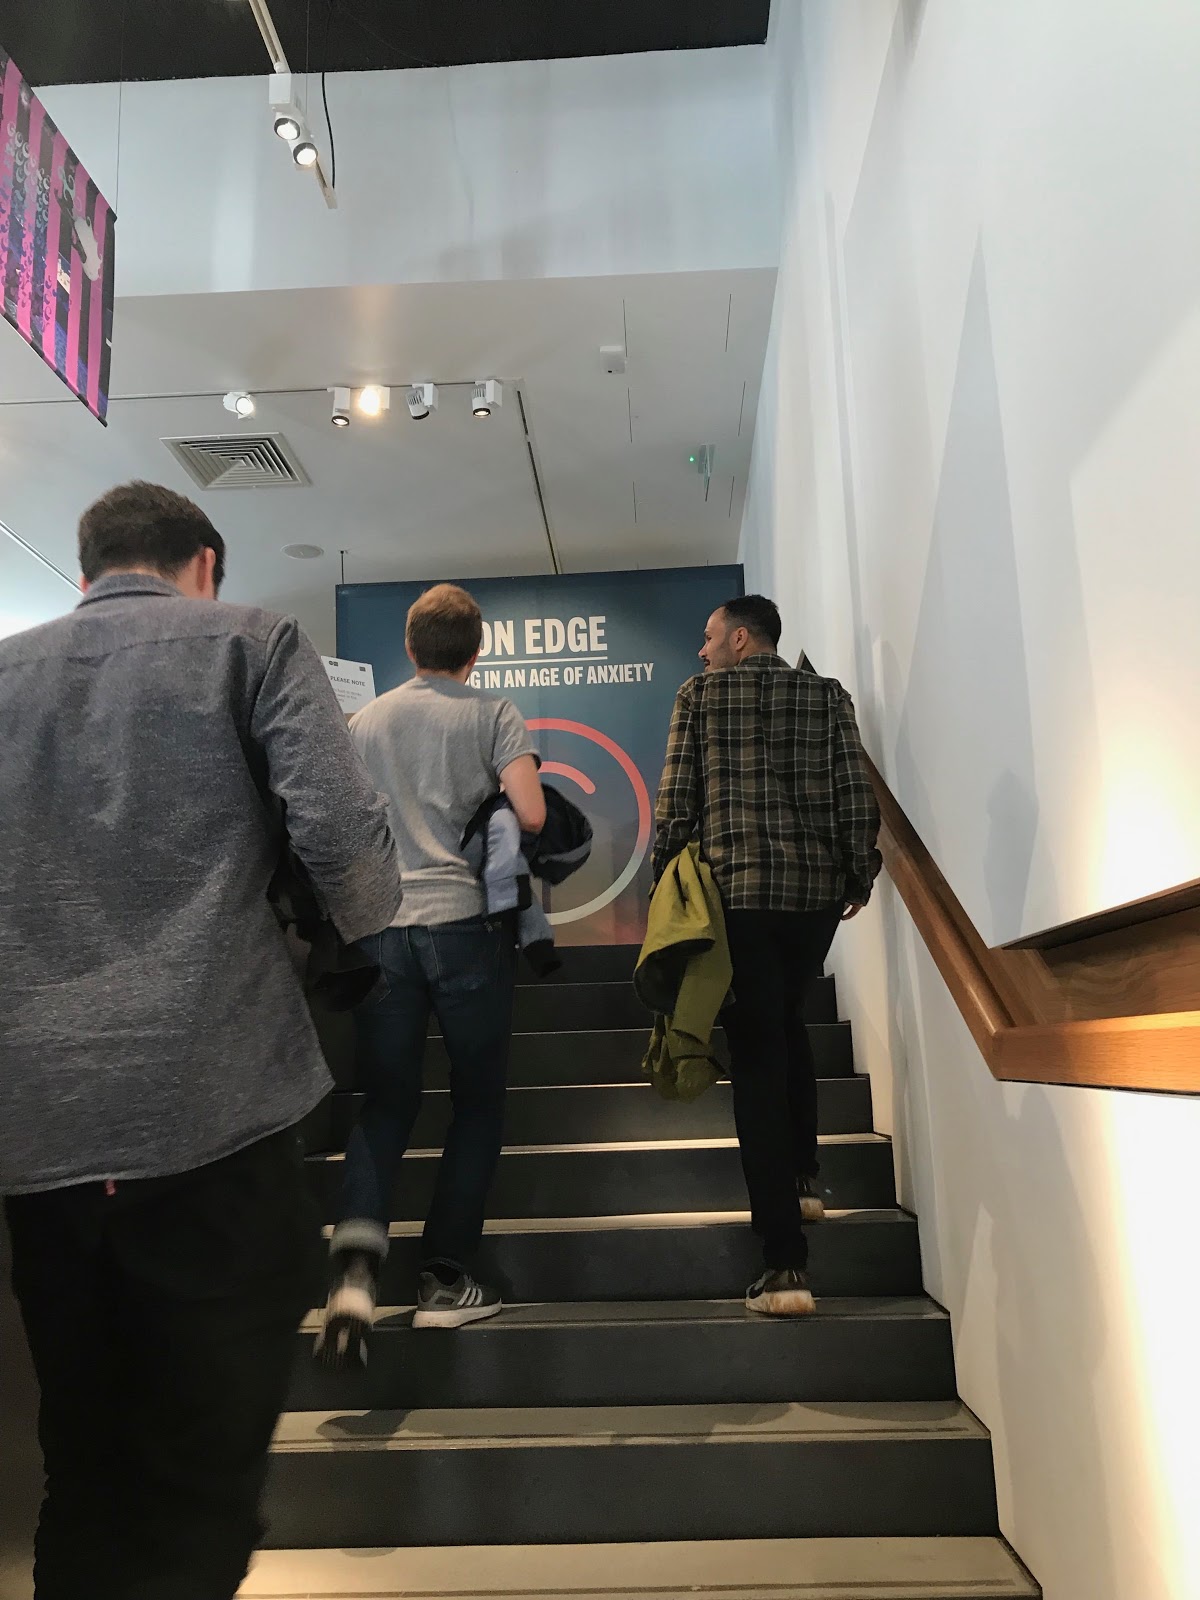 Three team members walking up stairs to exhibit with backs turned